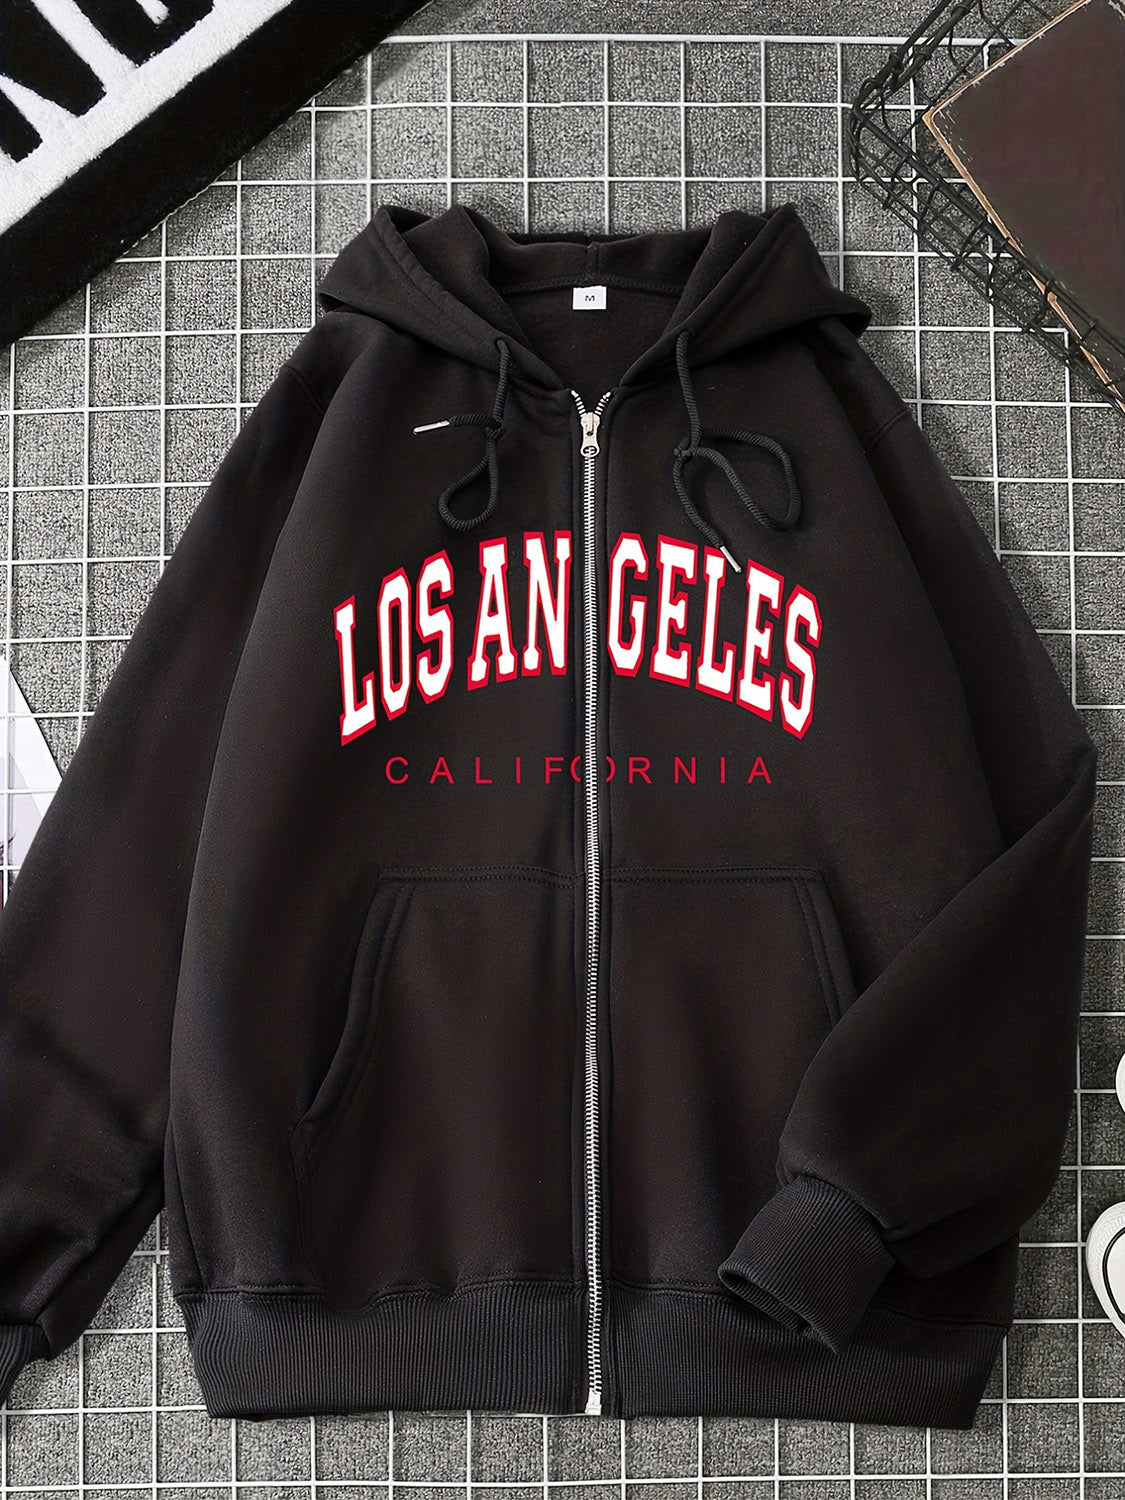 LOS ANGELES CALIFORNIA Graphic Drawstring Hooded Jacket - Black / S - Women’s Clothing & Accessories - Coats &